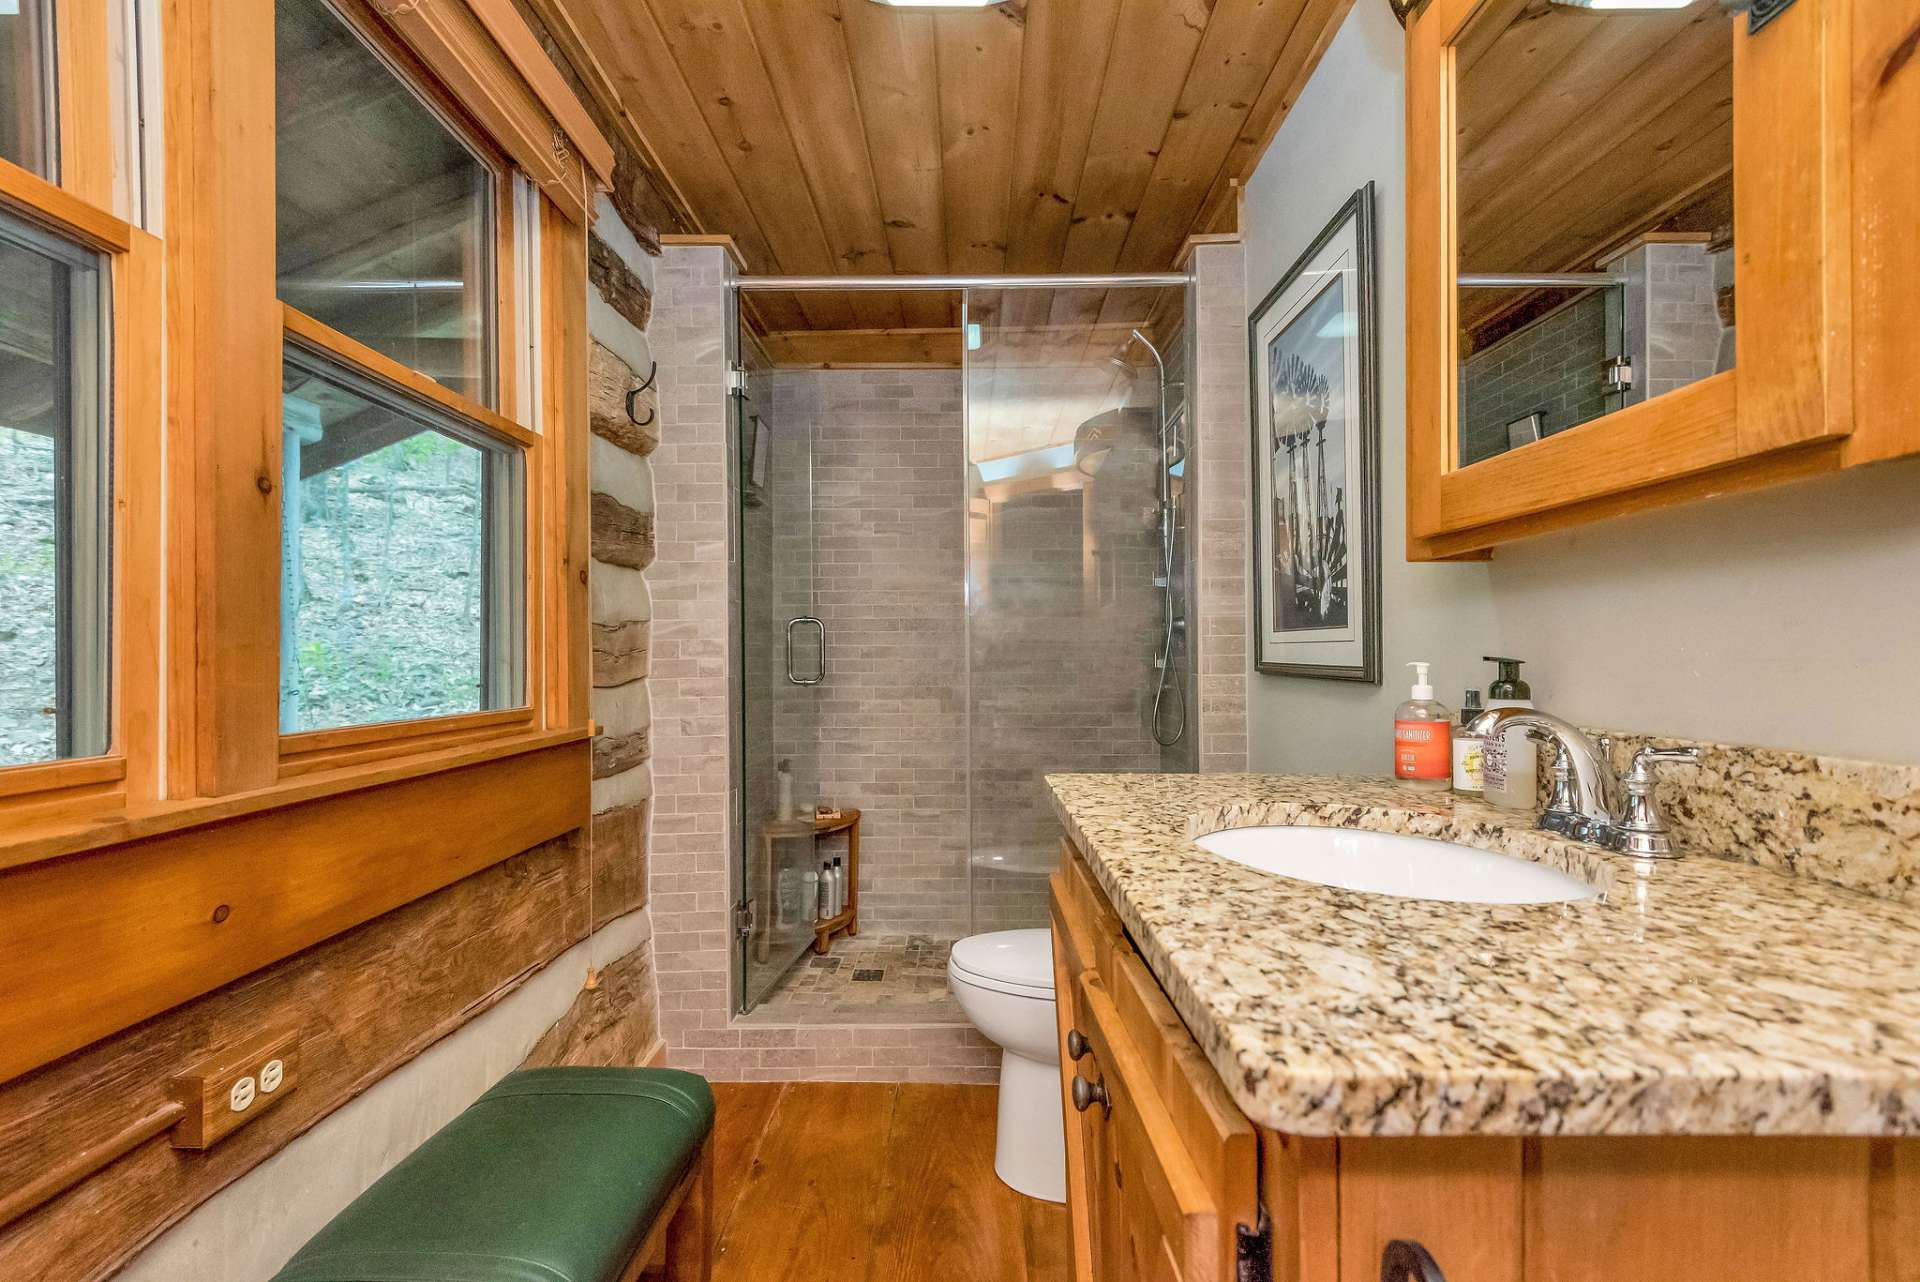 Main level bath offers walk-in tile shower with glass door & rustic style vanity with granite counter tops.